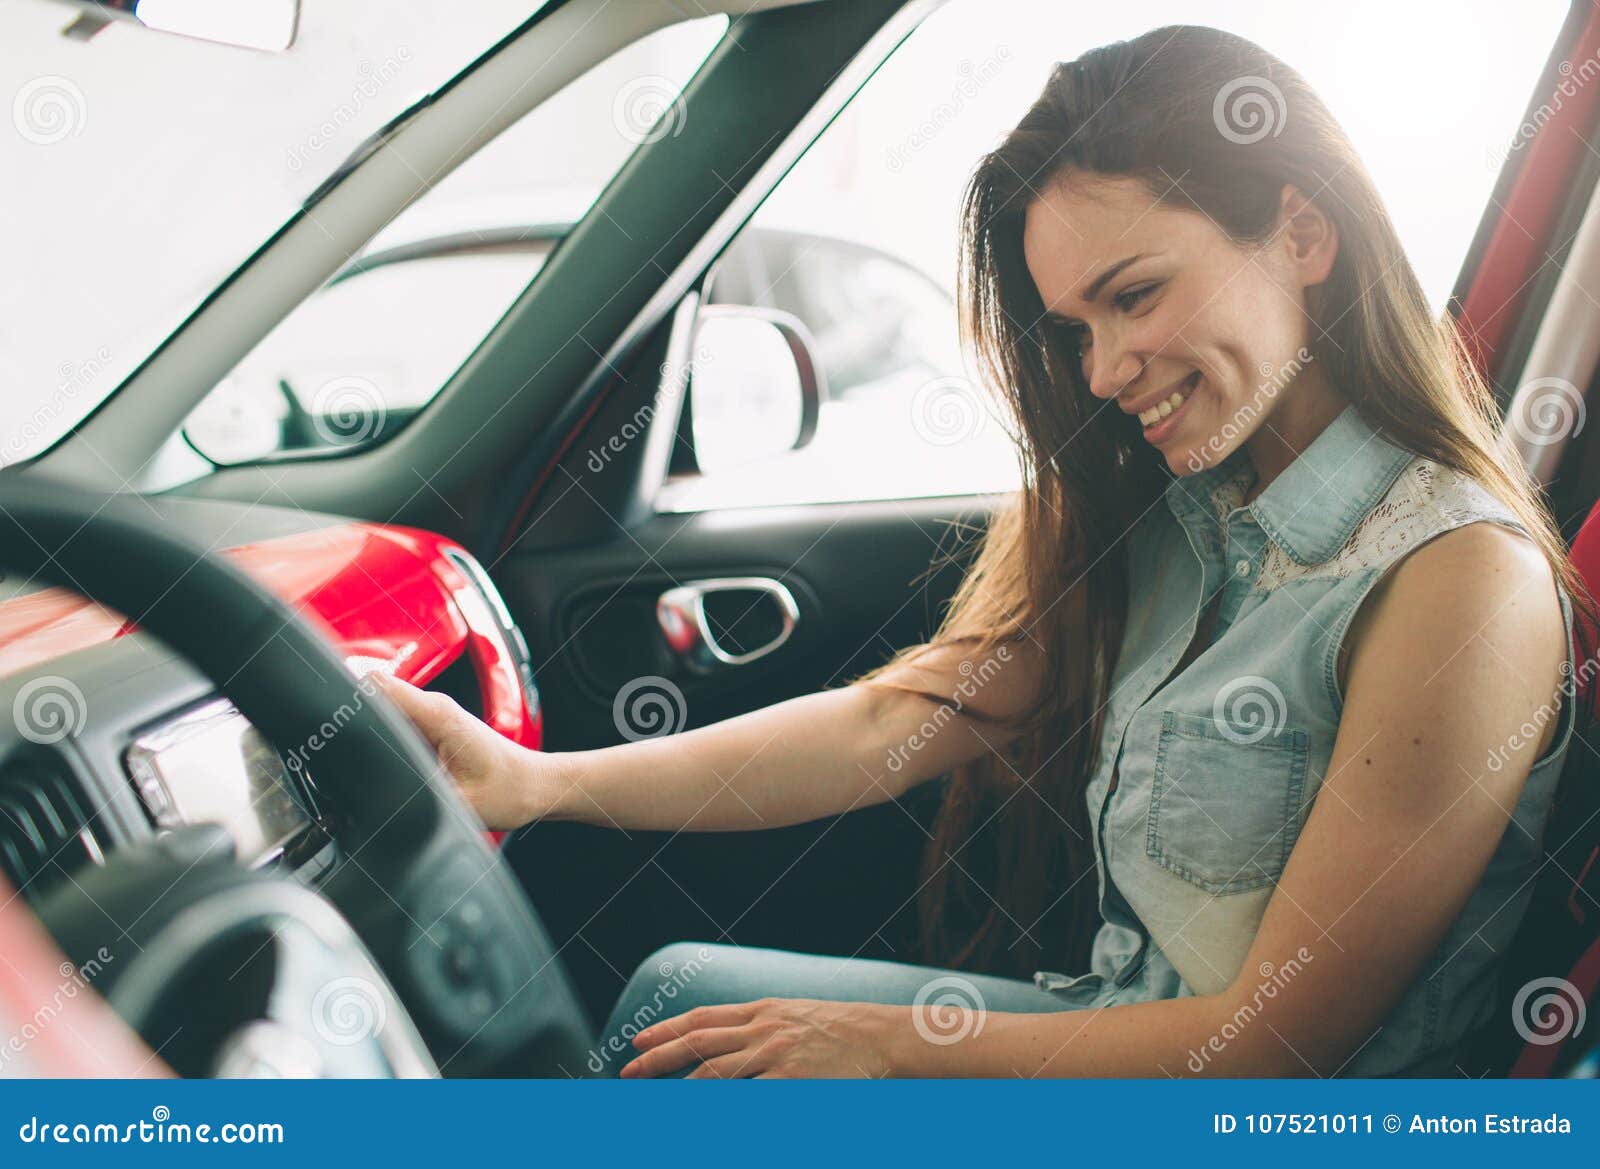 Beautiful Young Woman Buying a Car at Dealership. Female Model Sitting ...